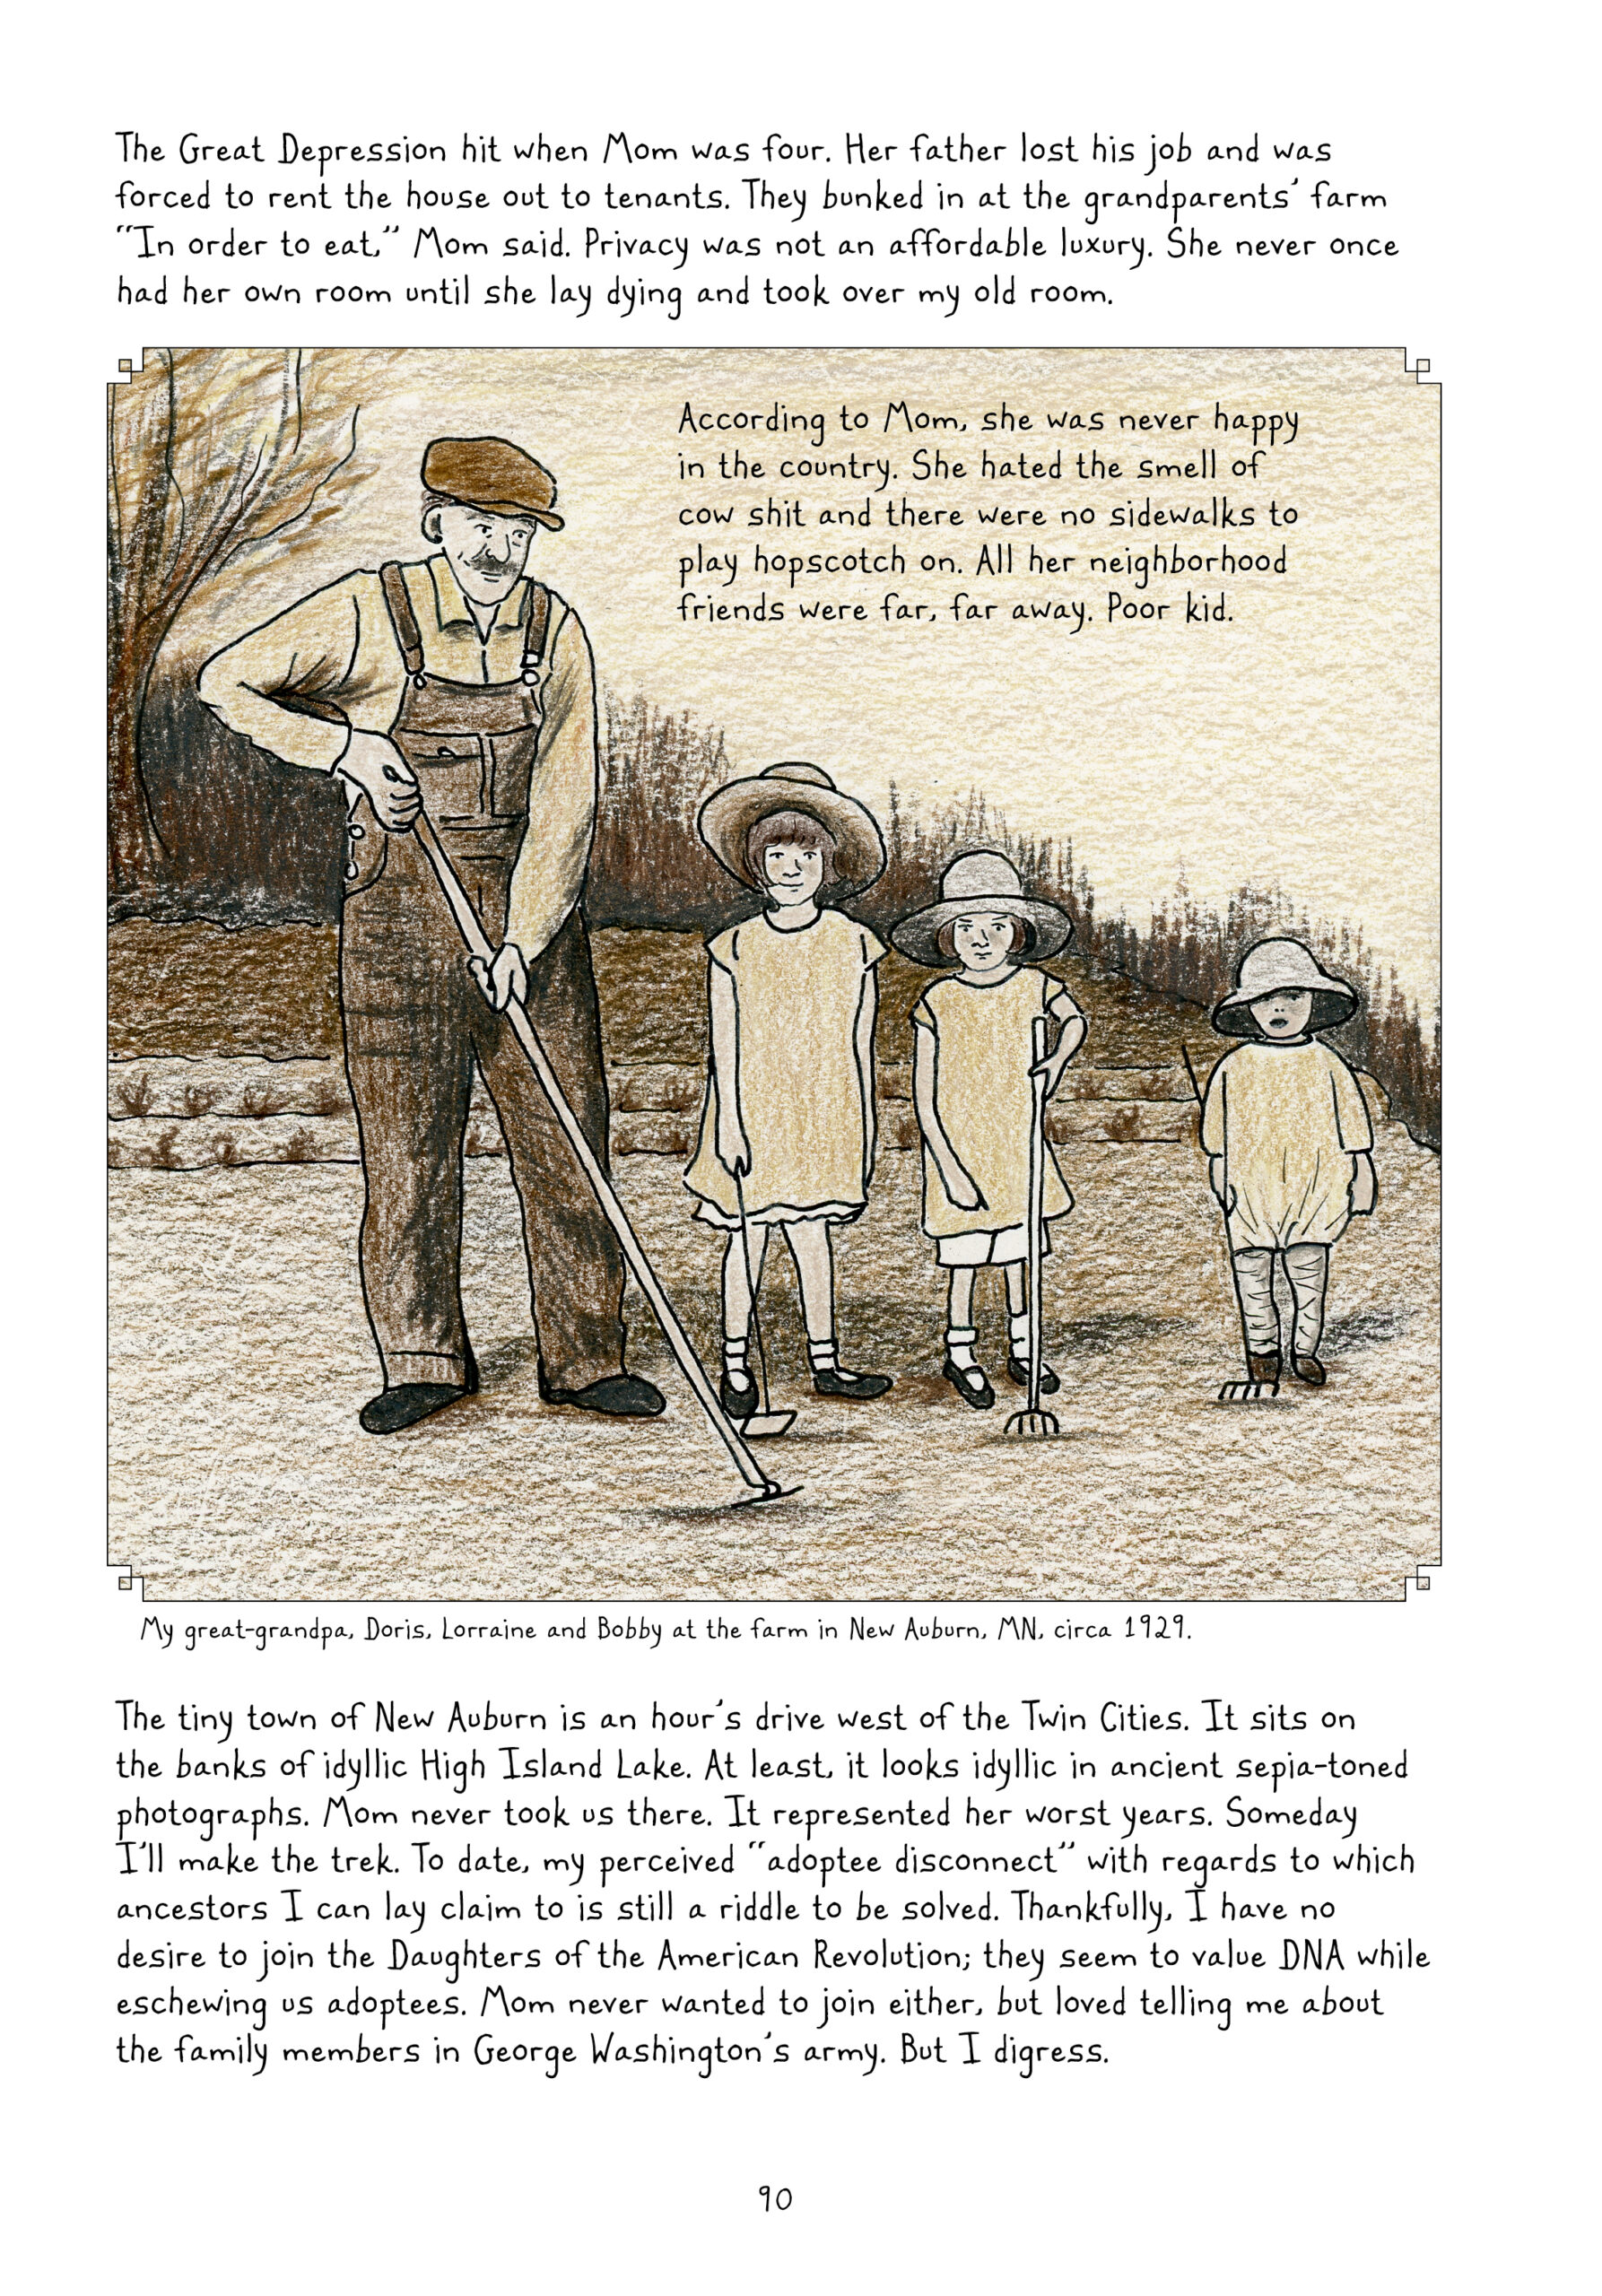 This page has a small chunk of text, then a panel taking up a bit more than half the page, followed by another chunk of text. Lynn narrates, â€œThe Great Depression hit when Mom was four. Her father lost his job and was forced to rent the house out to tenants. They bunked in at the grandparentsâ€™ farm â€˜In order to eat,â€™ Mom said. Privacy was not an affordable luxury. She never once had her own room until she lay dying and took over my old room.â€
The panel, roughly square in shape, shows a drawing of a sepia-tone photograph of an older man standing to the left of three little girls. They are all outside, with leafless trees in the background. The man is wearing a 1920s style hat, a light-color long-sleeve collared shirt, darker overalls, and black shoes. He has short-cropped hair and a full mustache. He is using a garden hoe. The three young girls descend in height and age from right to left. They are dressed similarly in wide-brimmed floppy sun hats, long tunic shirts, white shorts, white cuffed socks and black mary janes. The girl to the far left is wearing some sort of leggings instead of shorts, and different shoes; her shirt tucks in slightly, rather than flowing out like the others. They are each holding little garden tools, either a hoe or rake. The oldest girl is smiling, but the other two have neutral expressions. The photo is captioned, â€œMy great-grandpa, Doris, Lorraine and Bobby at the farm in New Auburn, MN, circa 1929.â€
Lynn continues narrating, â€œThe tiny town of New Auburn is an hourâ€™s drive west of the Twin Cities. It sits on the banks of idyllic High Island Lake. At least, it looks idyllic in ancient sepia-toned photographs. Mom never took us there. It represented her worst years. Someday Iâ€™ll make the trek. To date, my perceived â€˜adoptee disconnectâ€™ with regards to which ancestors I can lay claim to is still a riddle to be solved. Thankfully, I have no desire to join the Daughters of the American Revolution; they seem to value DNA while eschewing us adoptees. Mom never wanted to join either, but loved telling me about the family members in George Washingtonâ€™s army. But I digress.â€